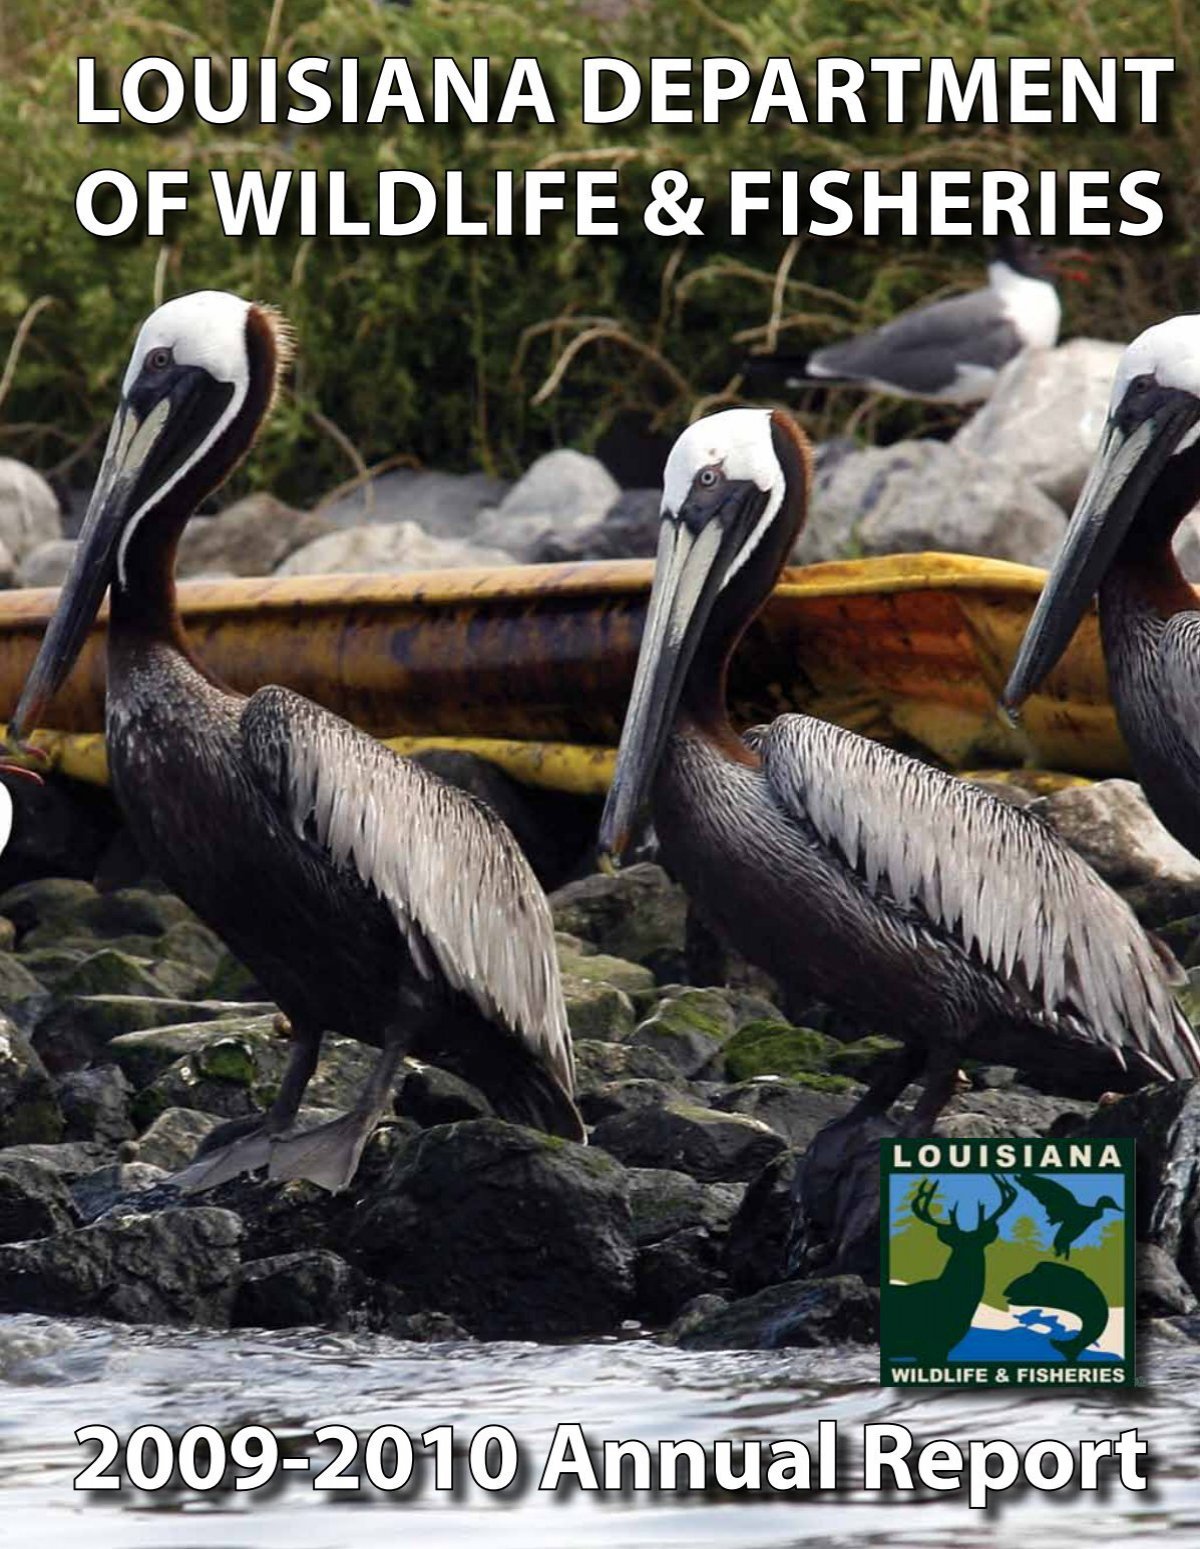 2009-2010 Annual Report - Louisiana Department of Wildlife and